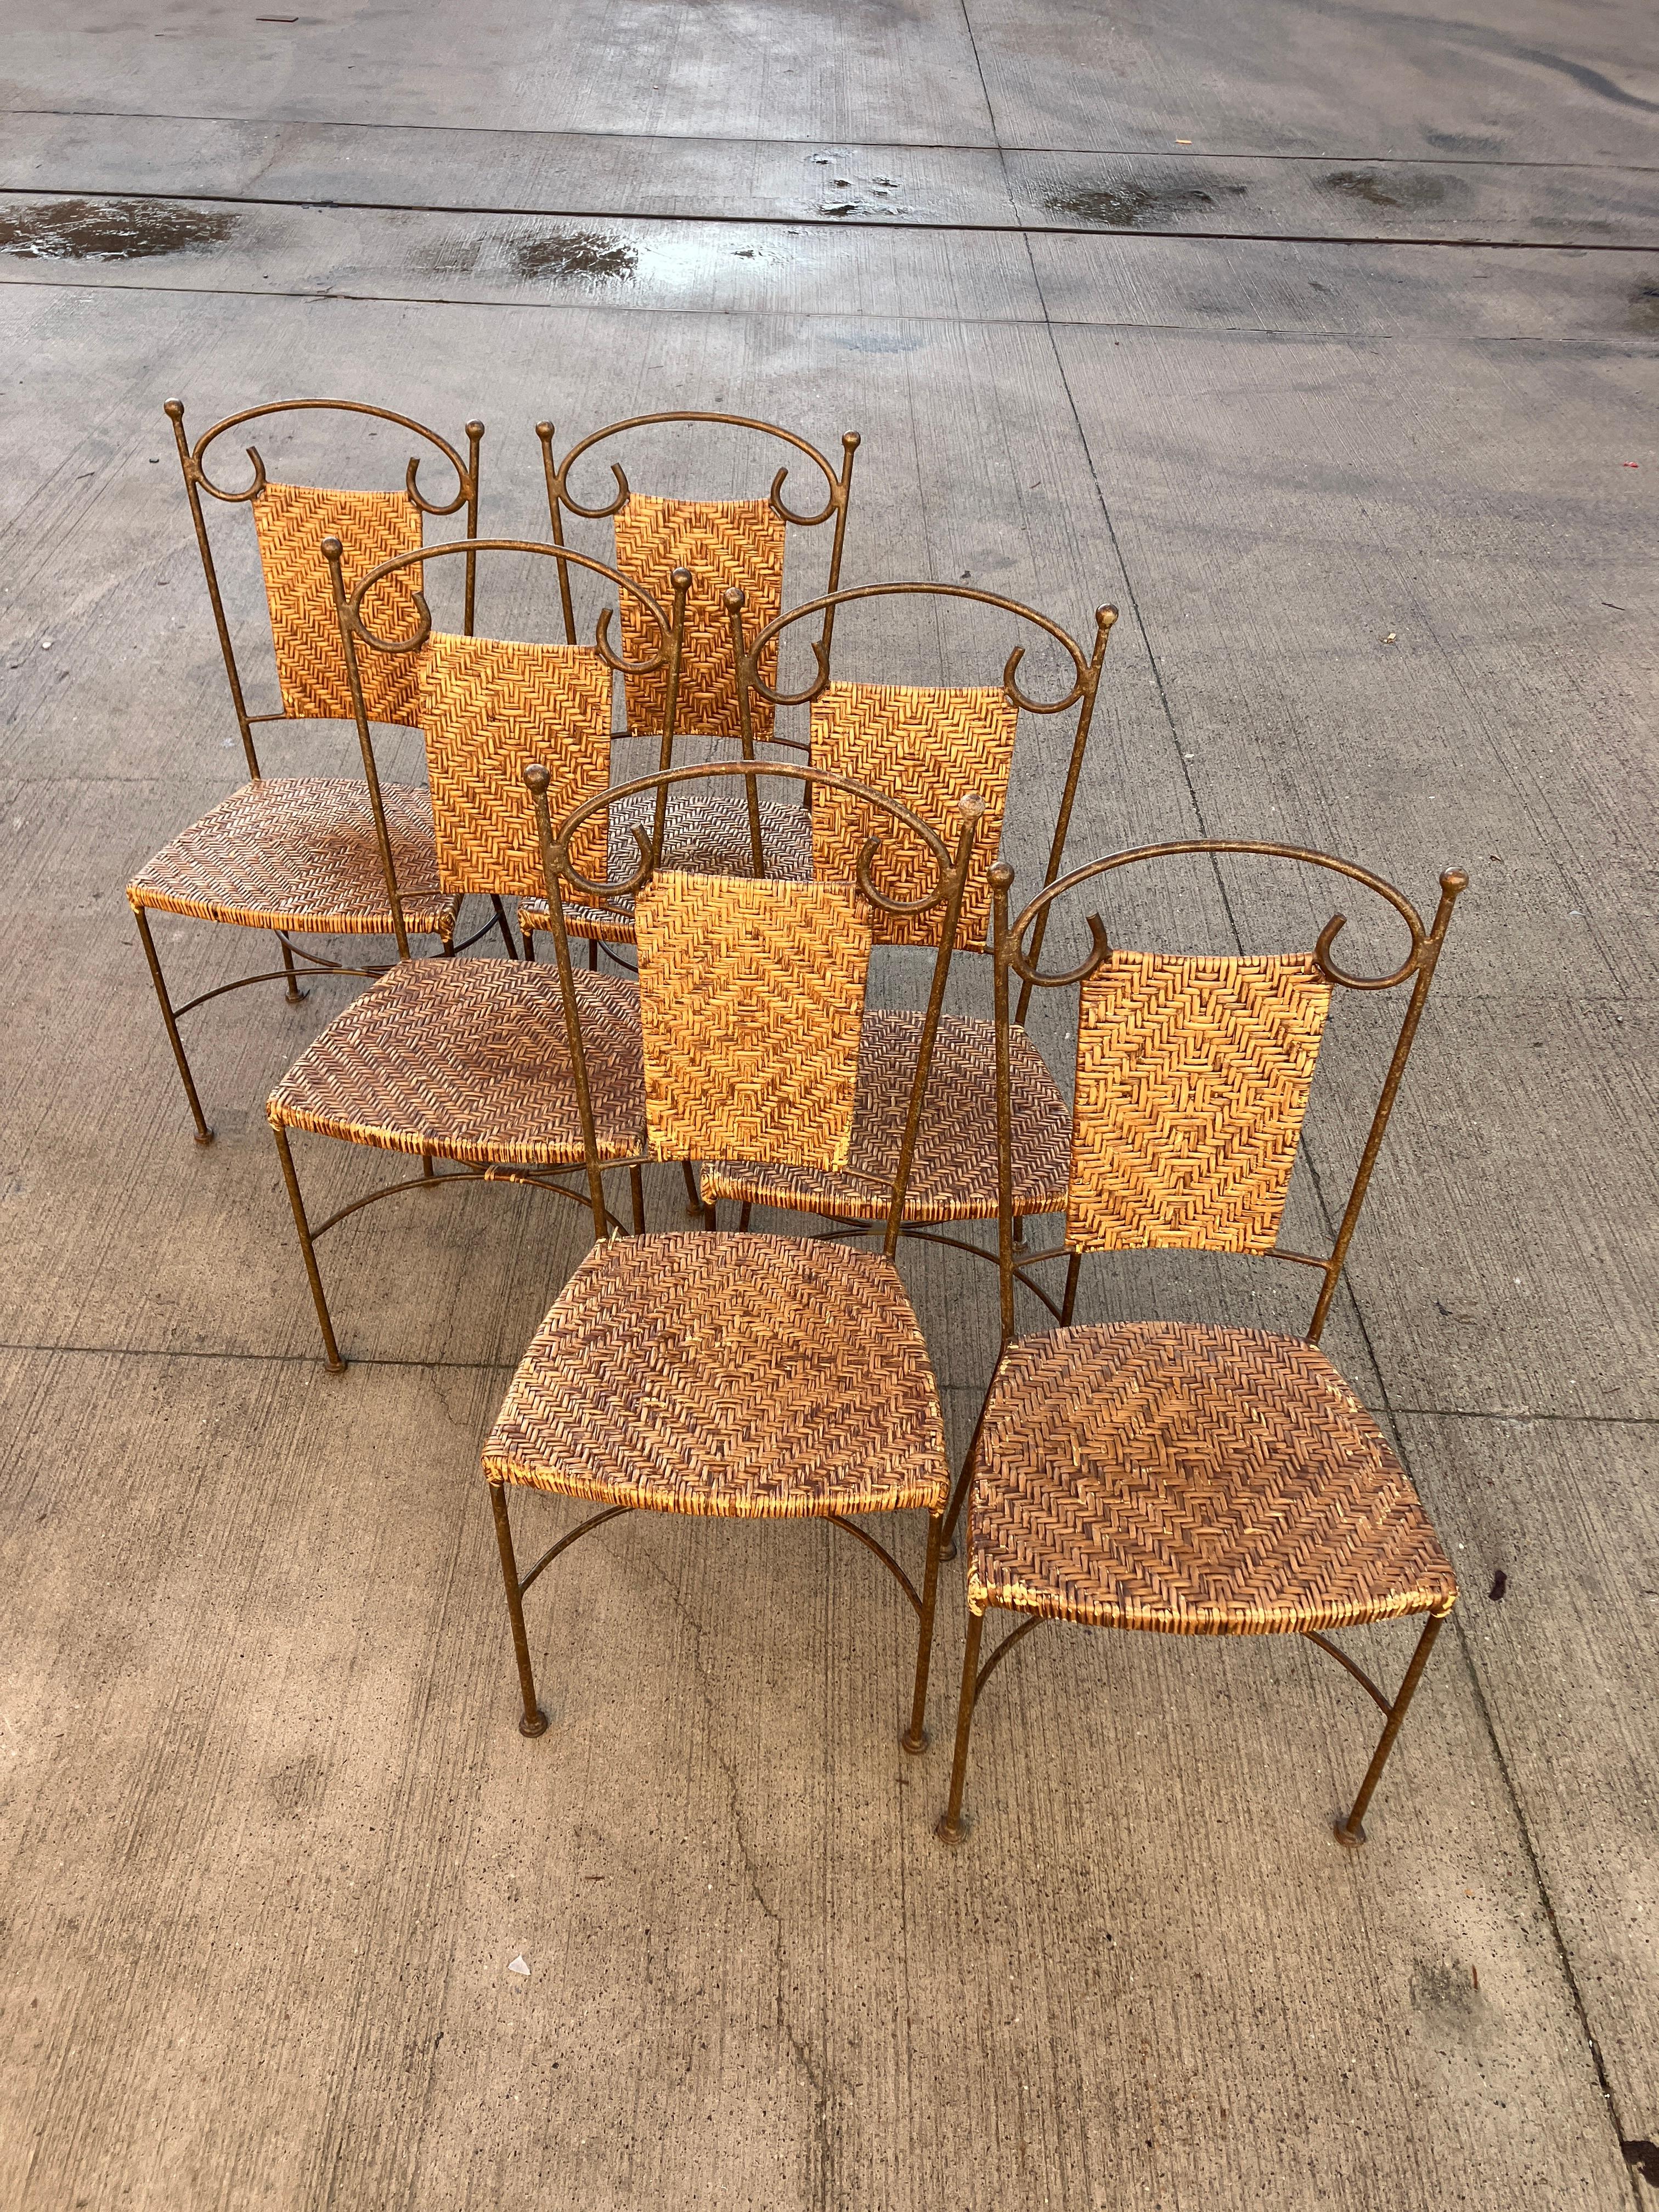 Metalwork Vintage wrought Iron Dining Chairs with Wicker Seating x 6 For Sale